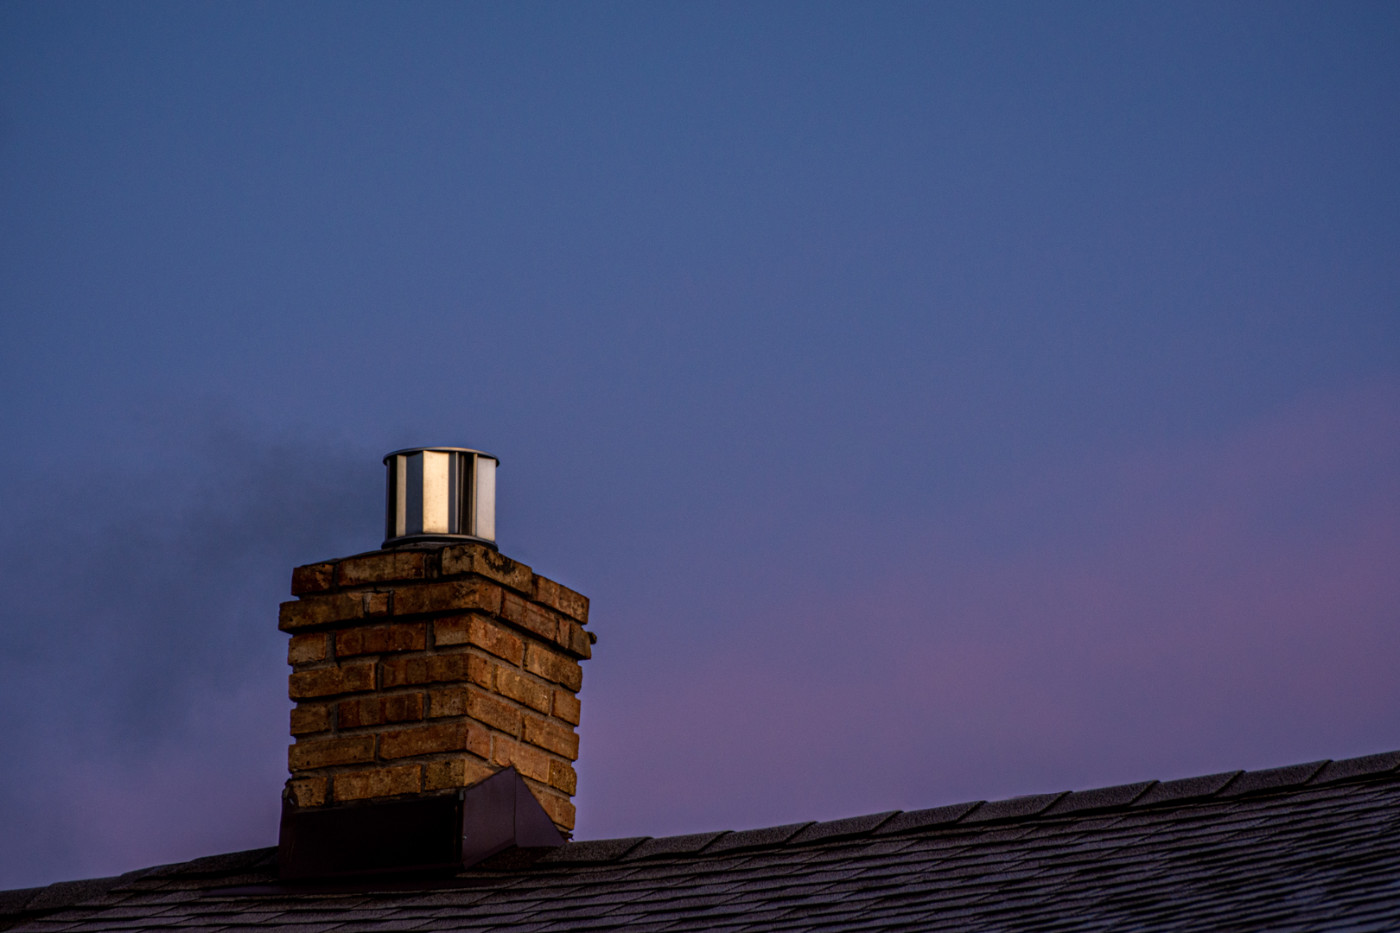 dark rooftop with brick chimney and shiny metal stack against a deep blue sky